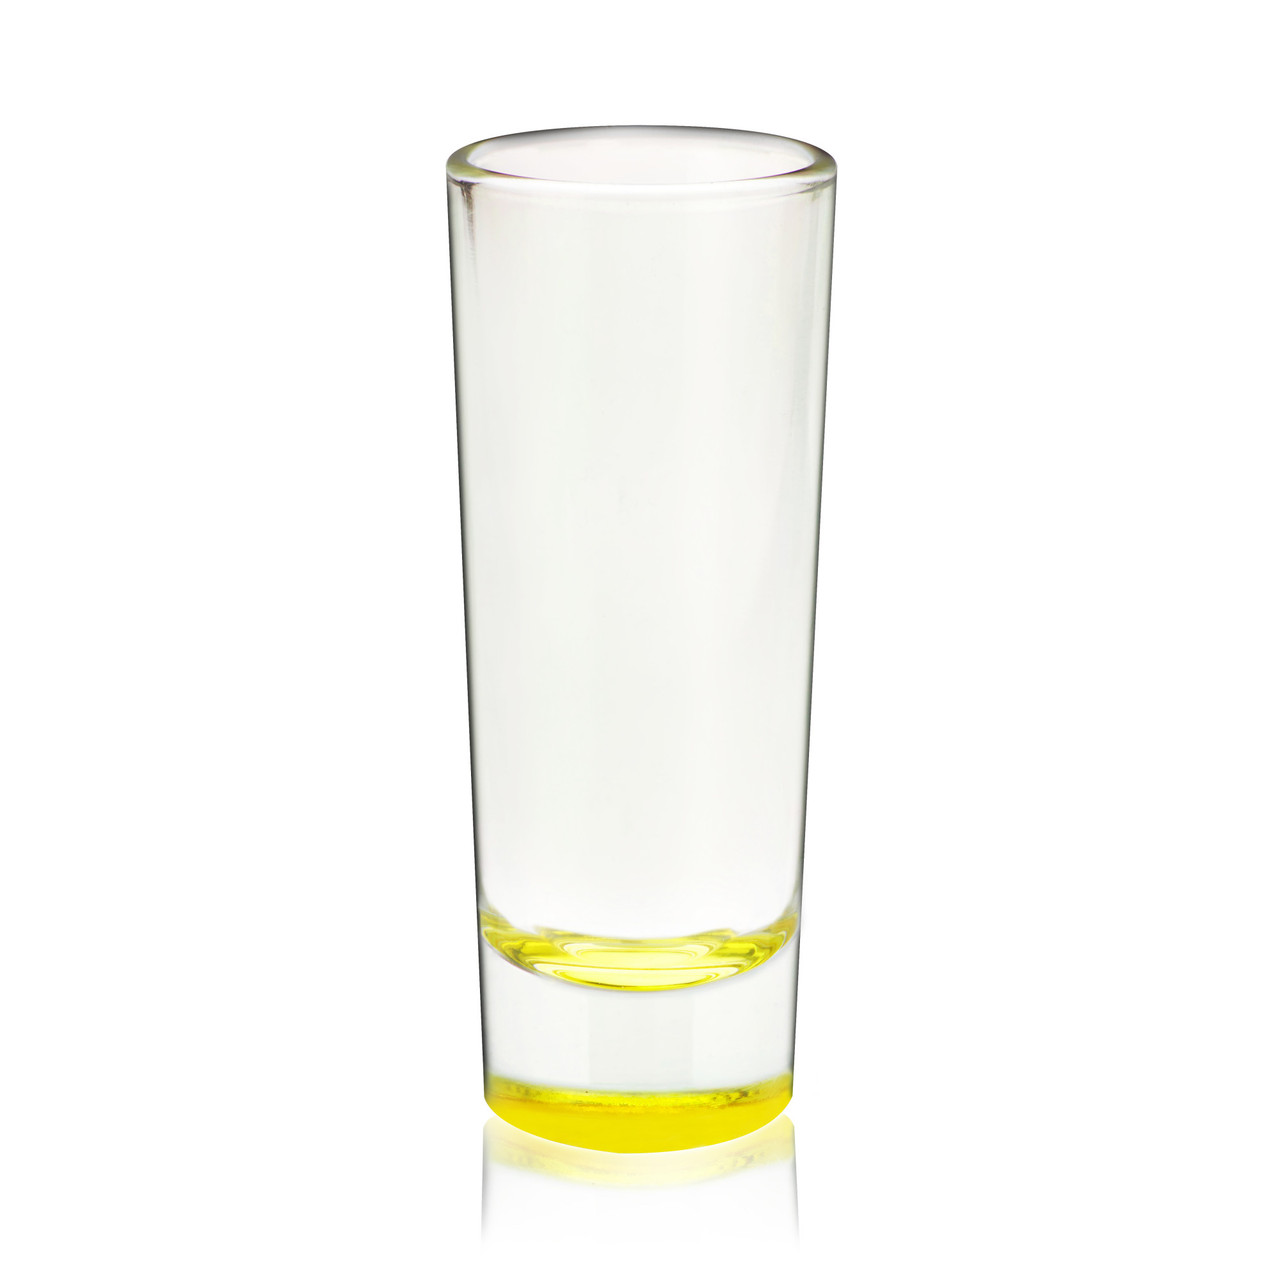 https://cdn11.bigcommerce.com/s-oo0gdojvjo/images/stencil/1280x1280/products/68751/101820/multi-color-shot-glass-shooters-by-true-set-of-6-3__67803.1683797299.jpg?c=2&imbypass=on